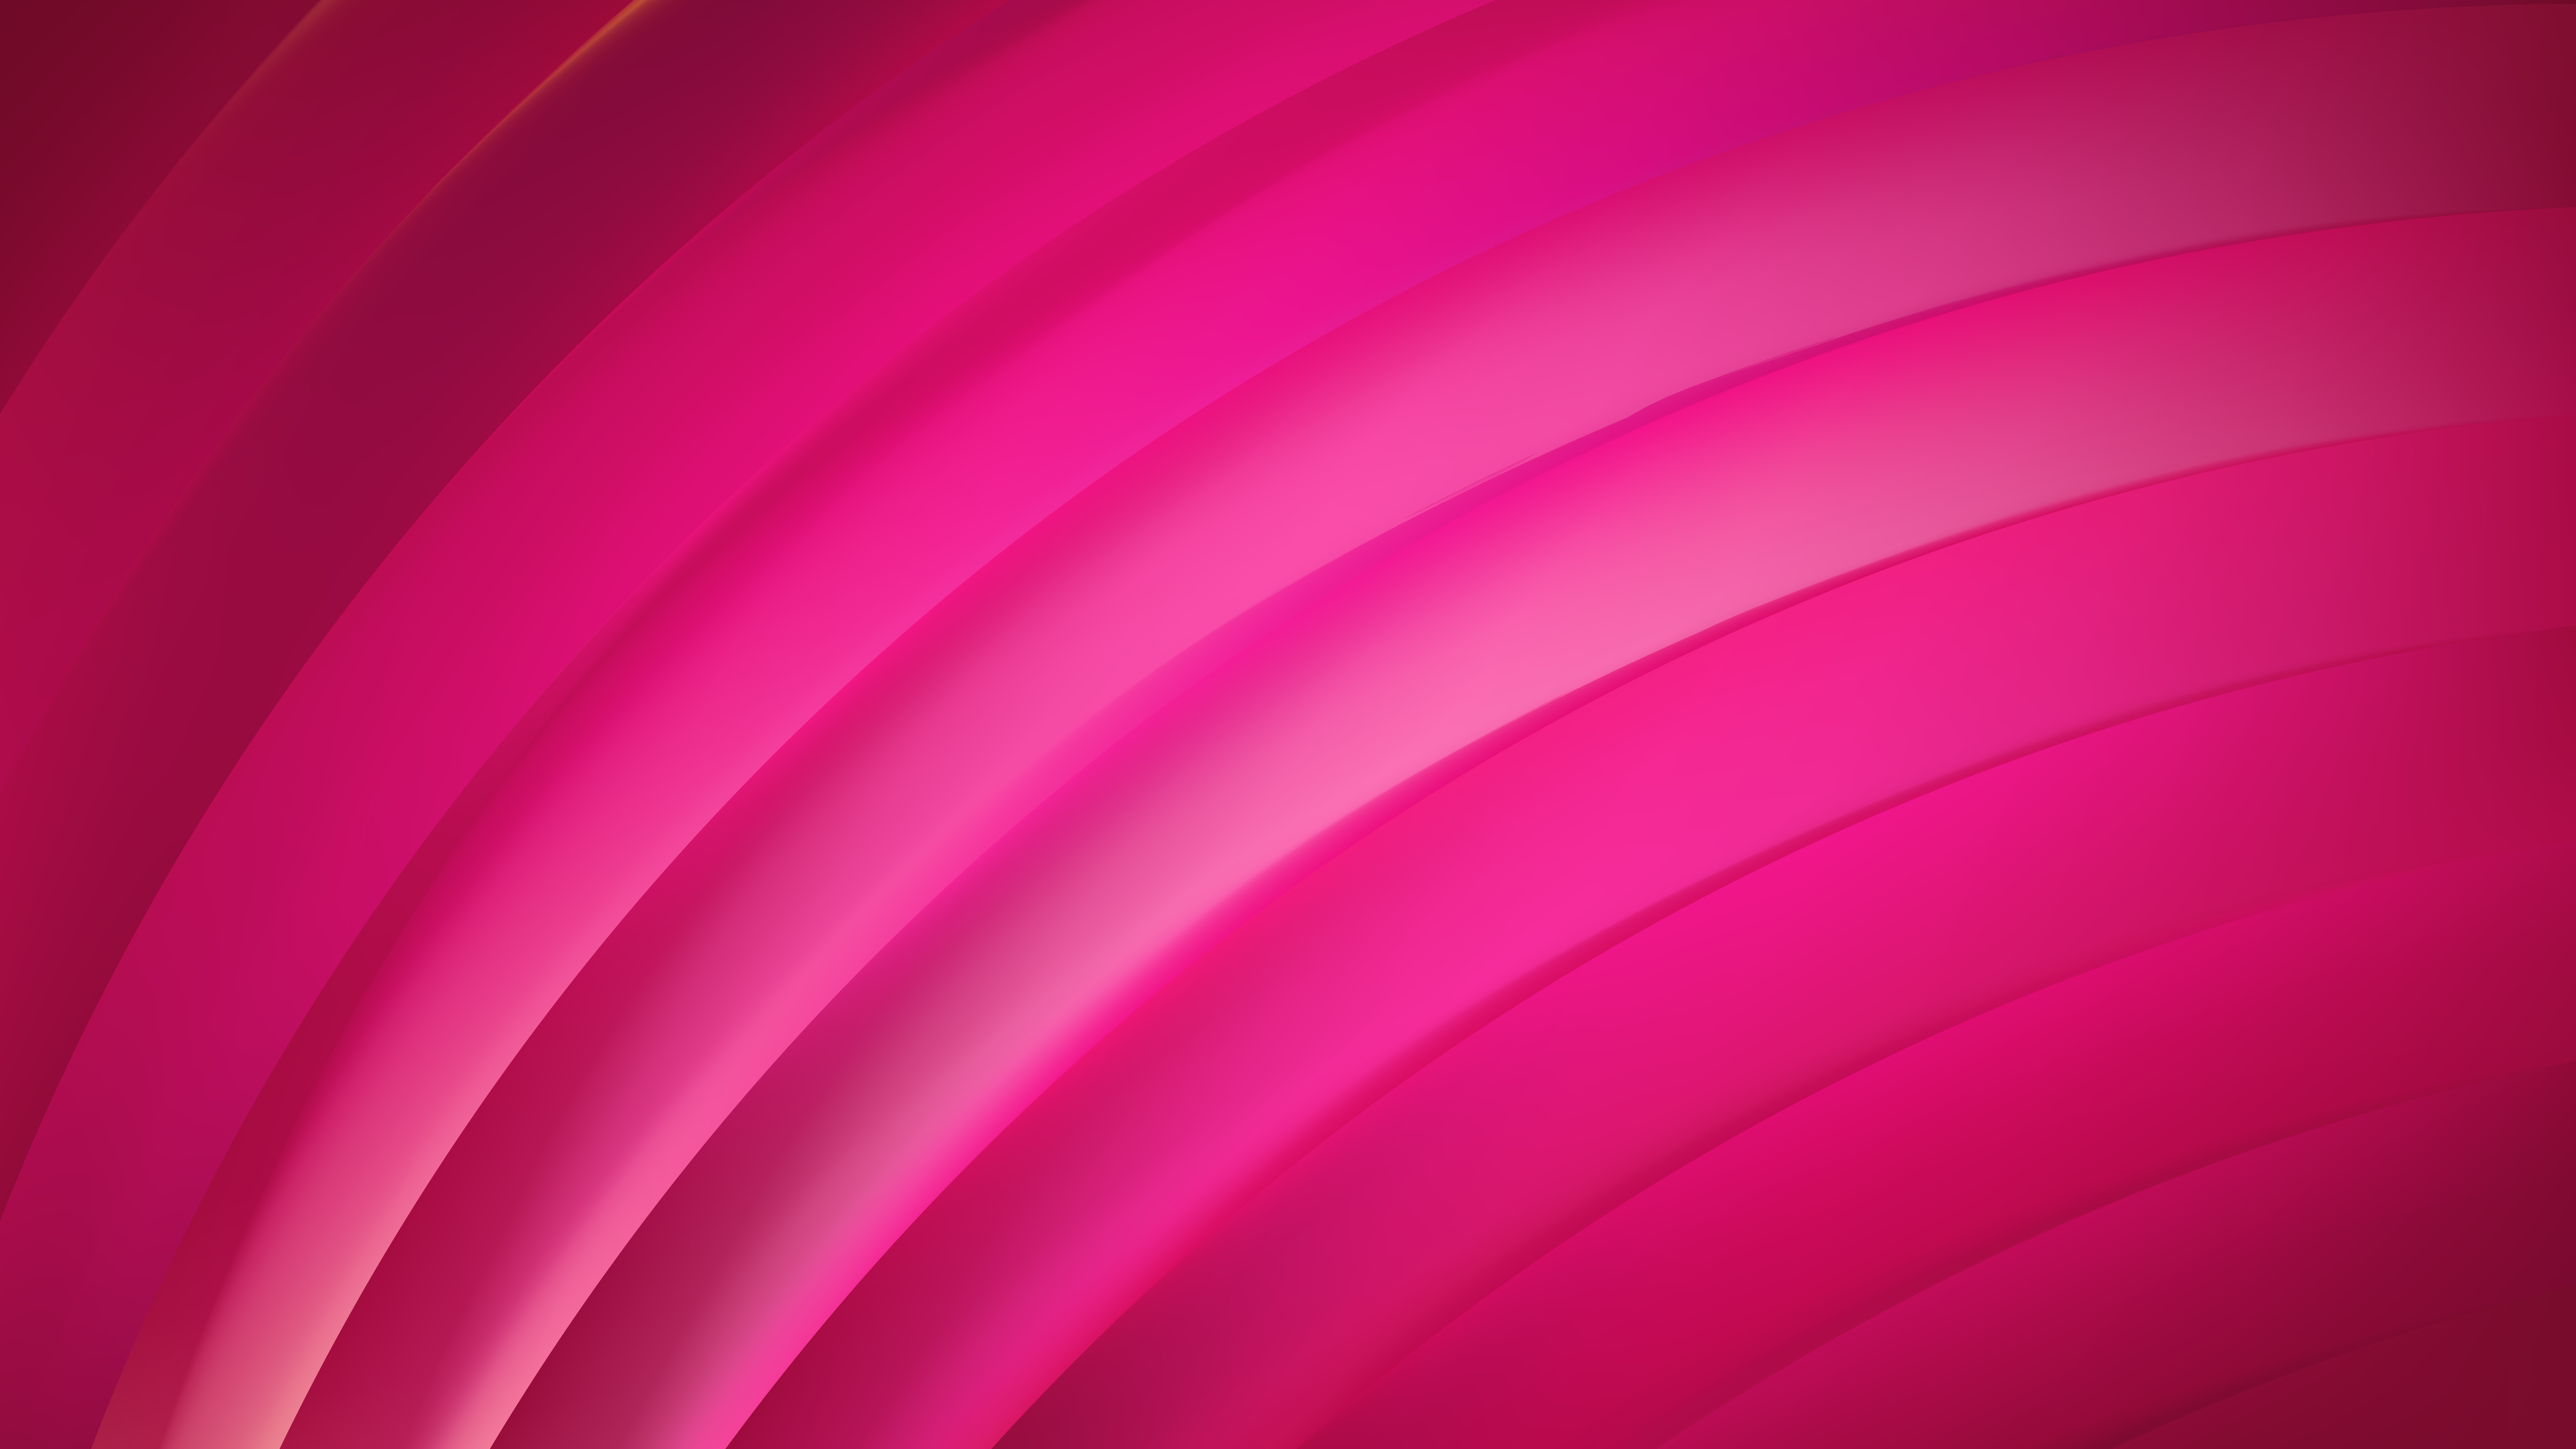 Free Abstract Hot Pink Shiny Curved Stripes Background We choose the most r...